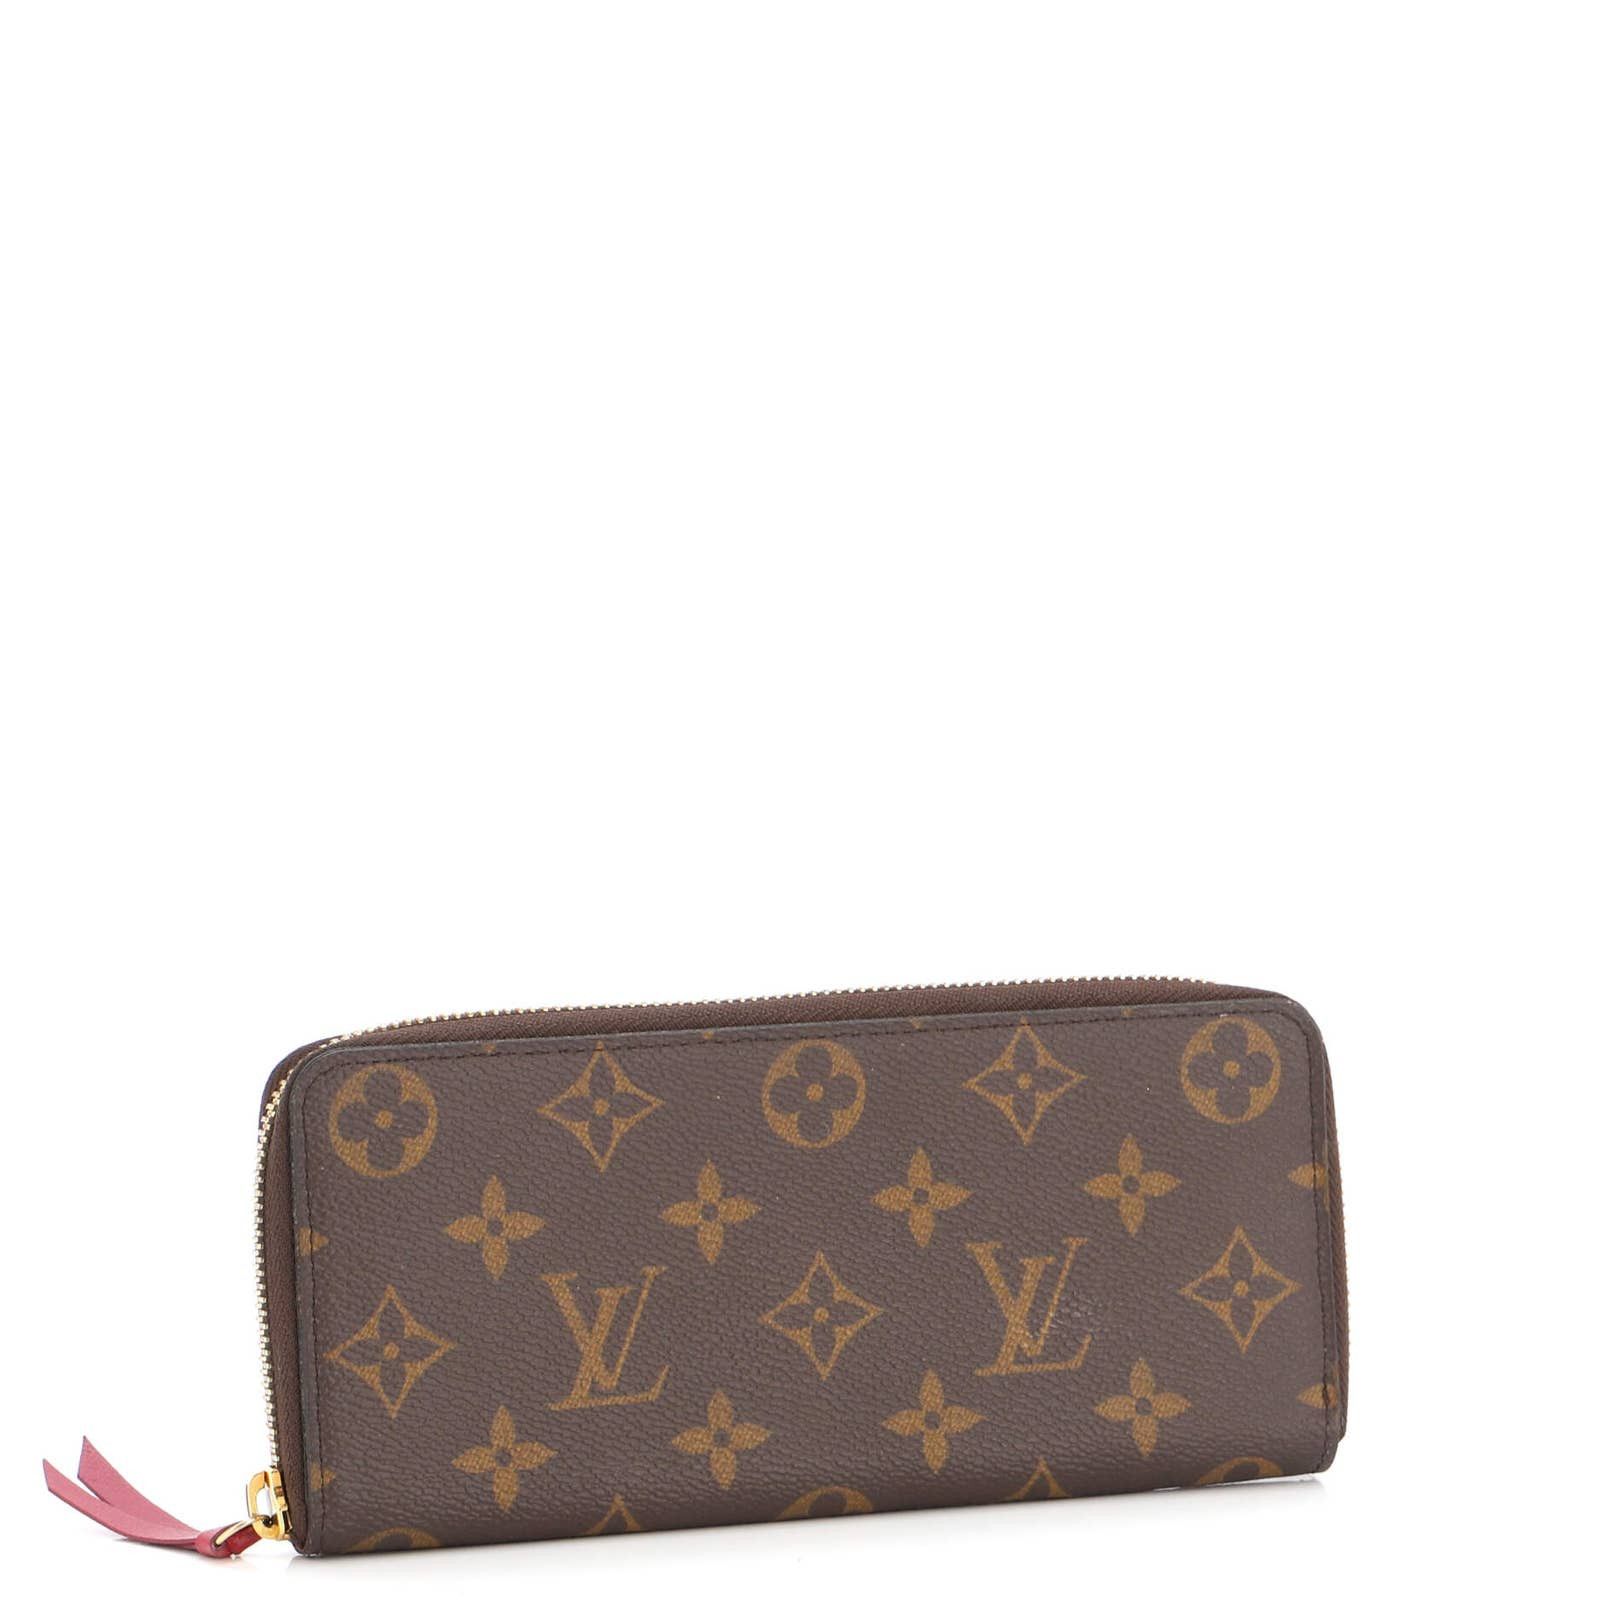 This Louis Vuitton Monogram Canvas Clemence Wallet isn't all about elegance  and style. It is practical and conveni…